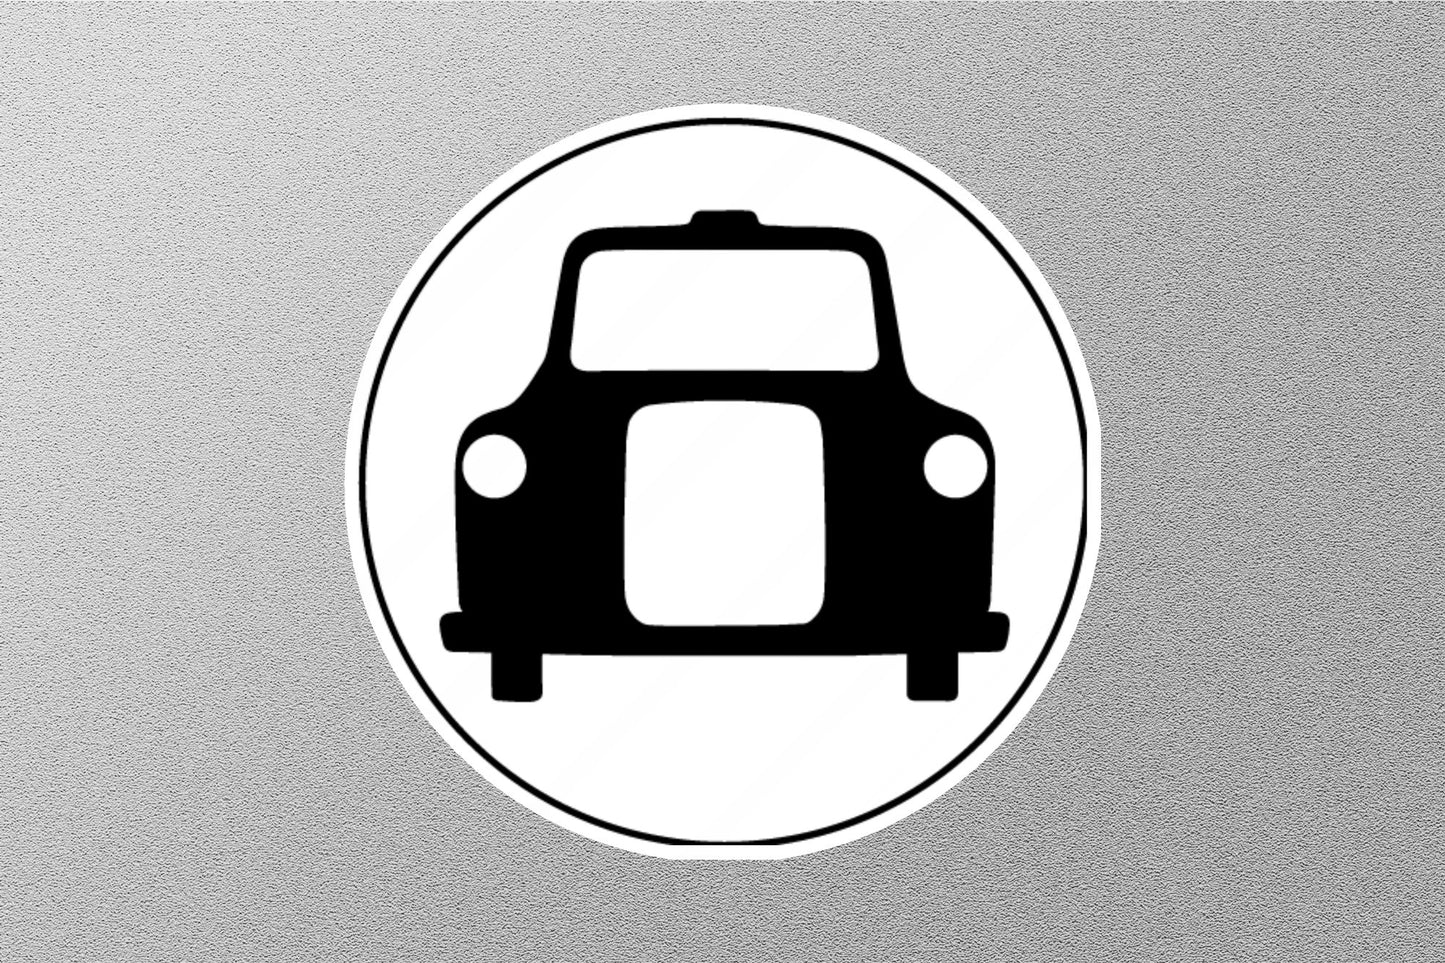 Taxi UK Sign Sticker